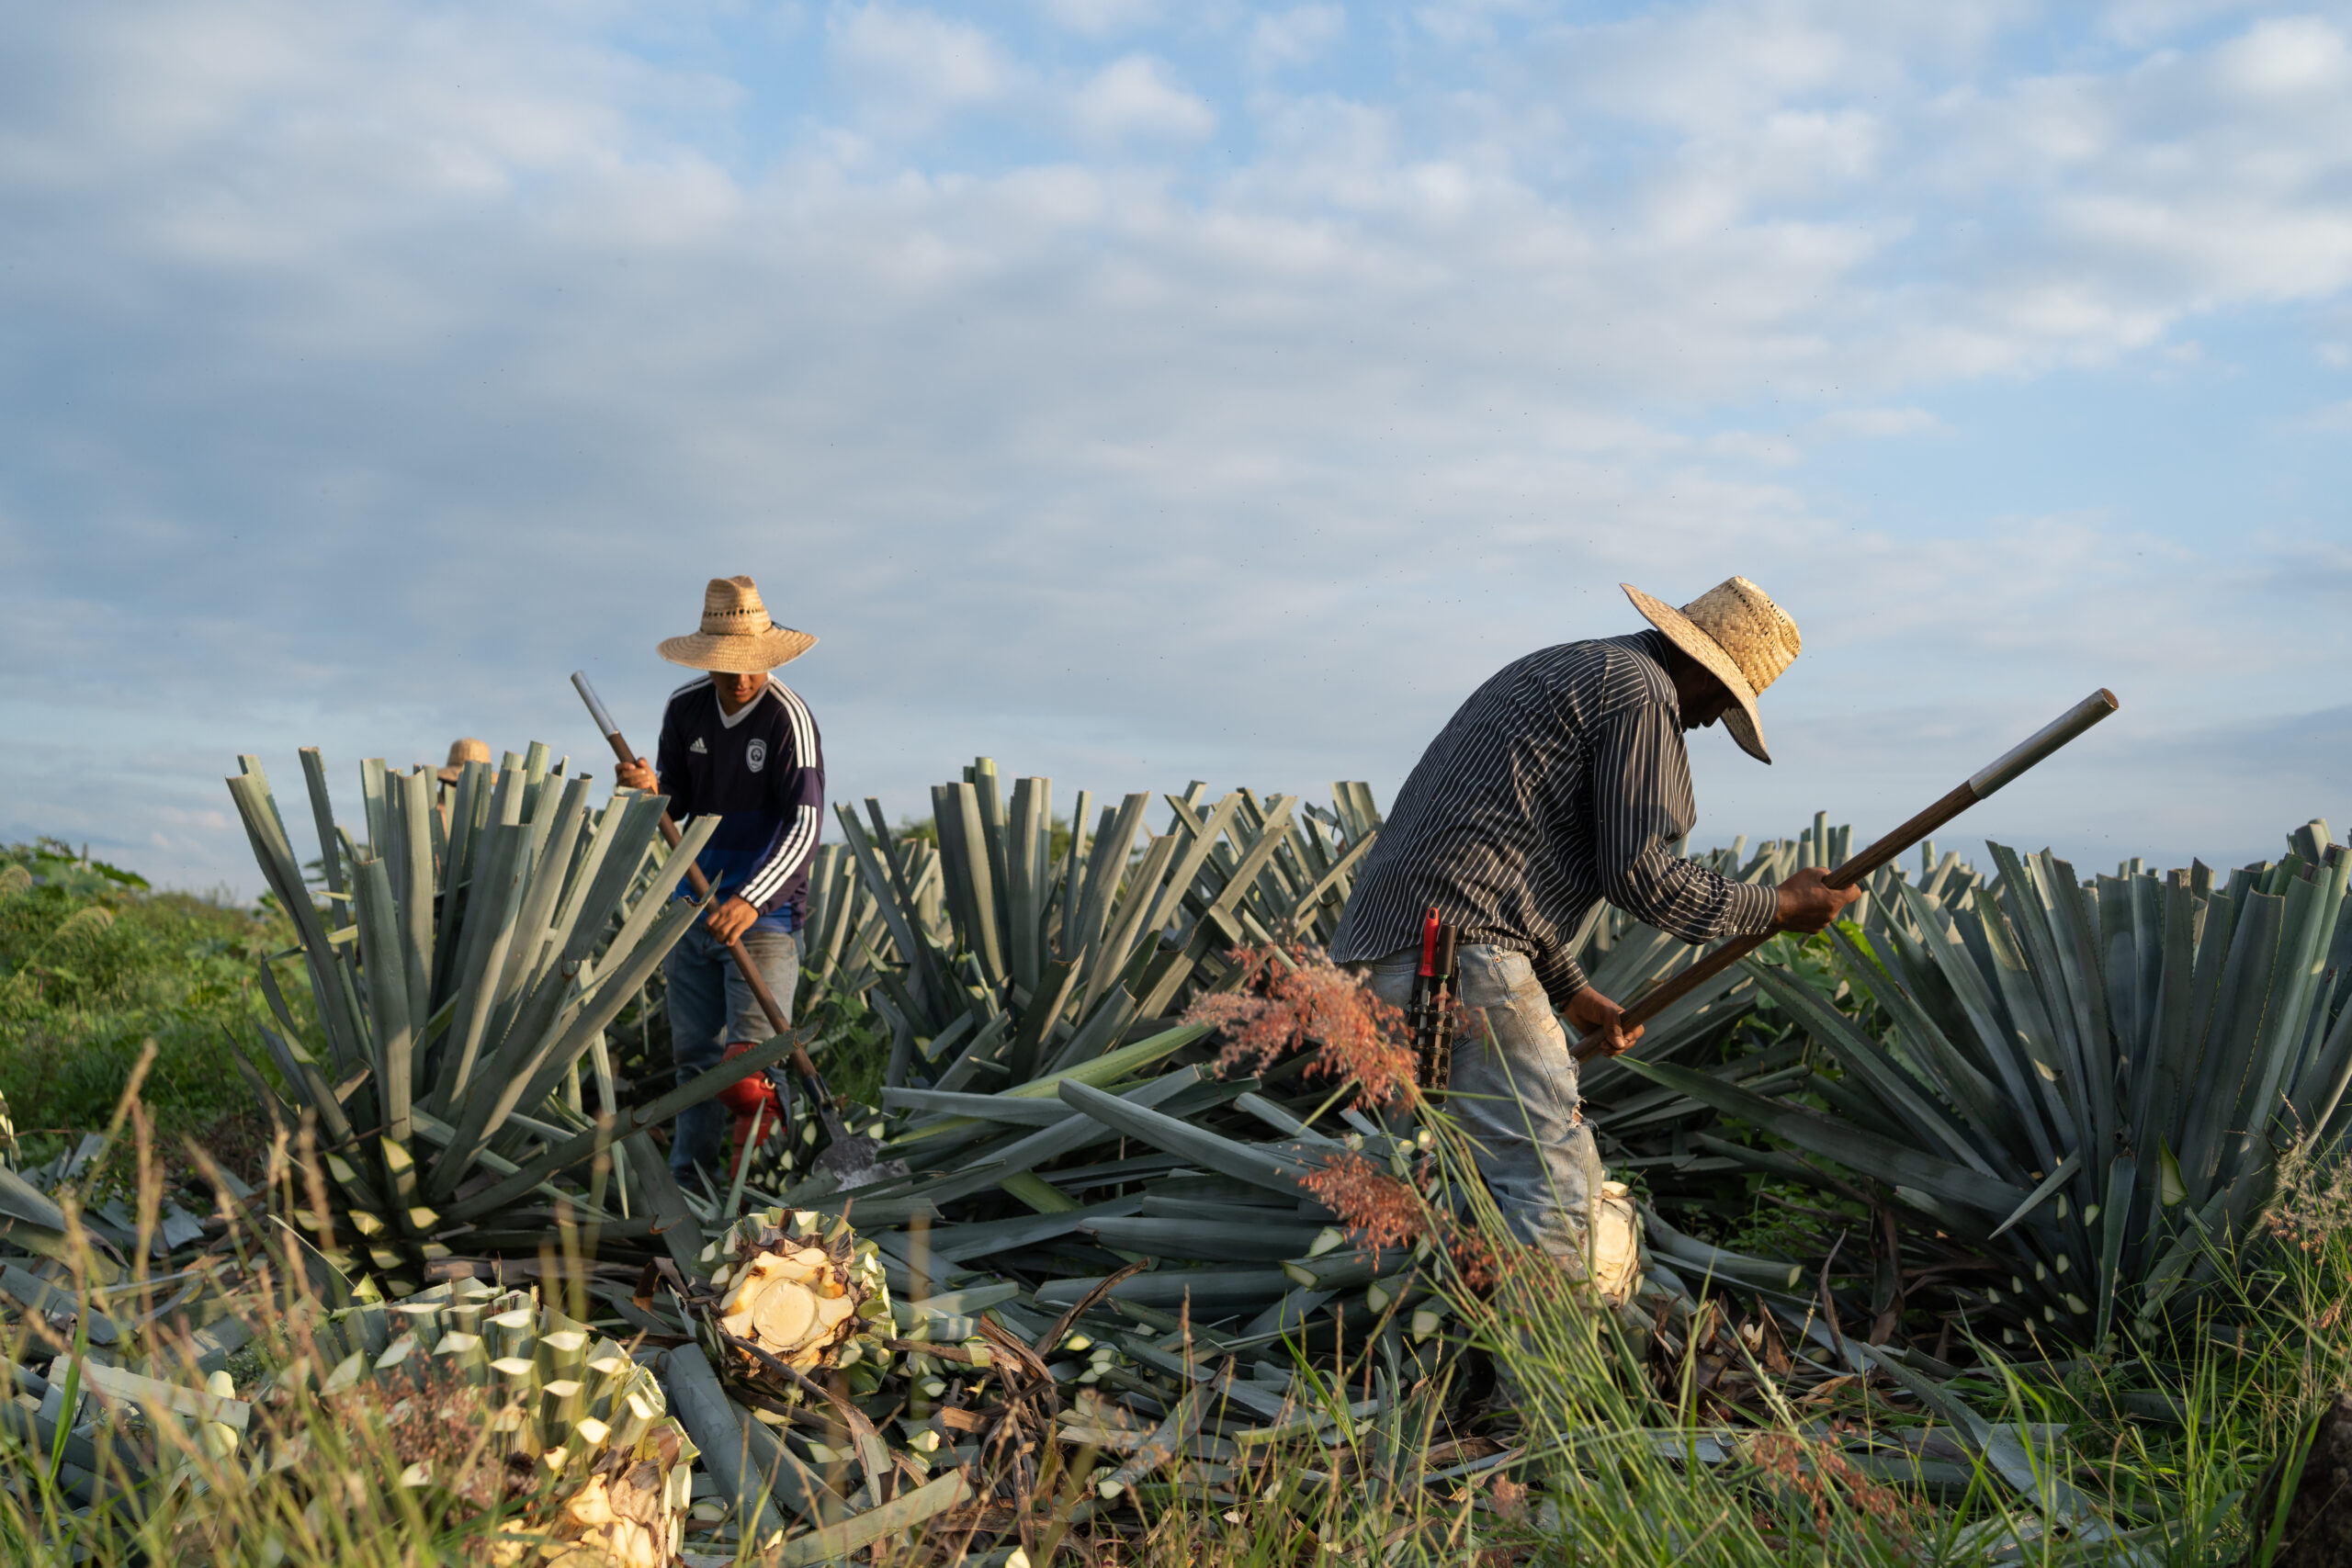 Tequila Jalisco, Mexico - August 15, 2020: Two farmers are cutting the agave stalks in the field.